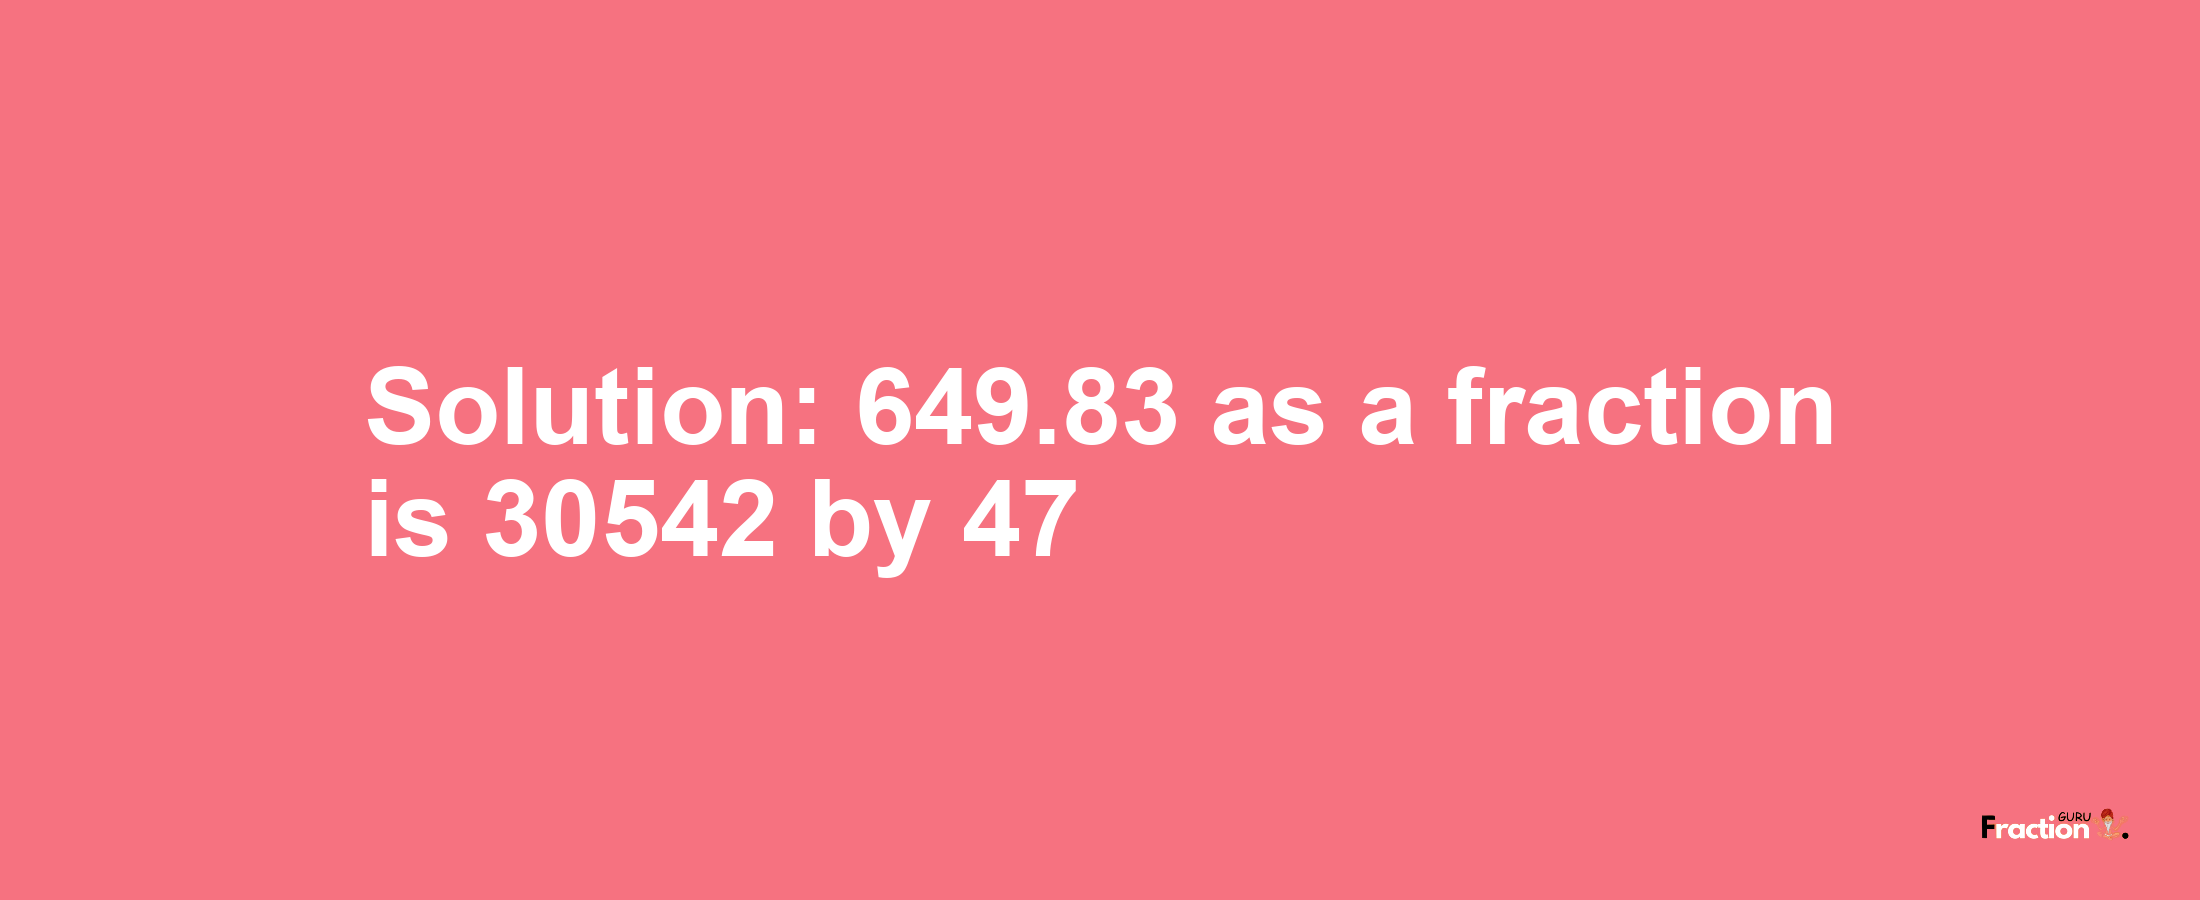 Solution:649.83 as a fraction is 30542/47